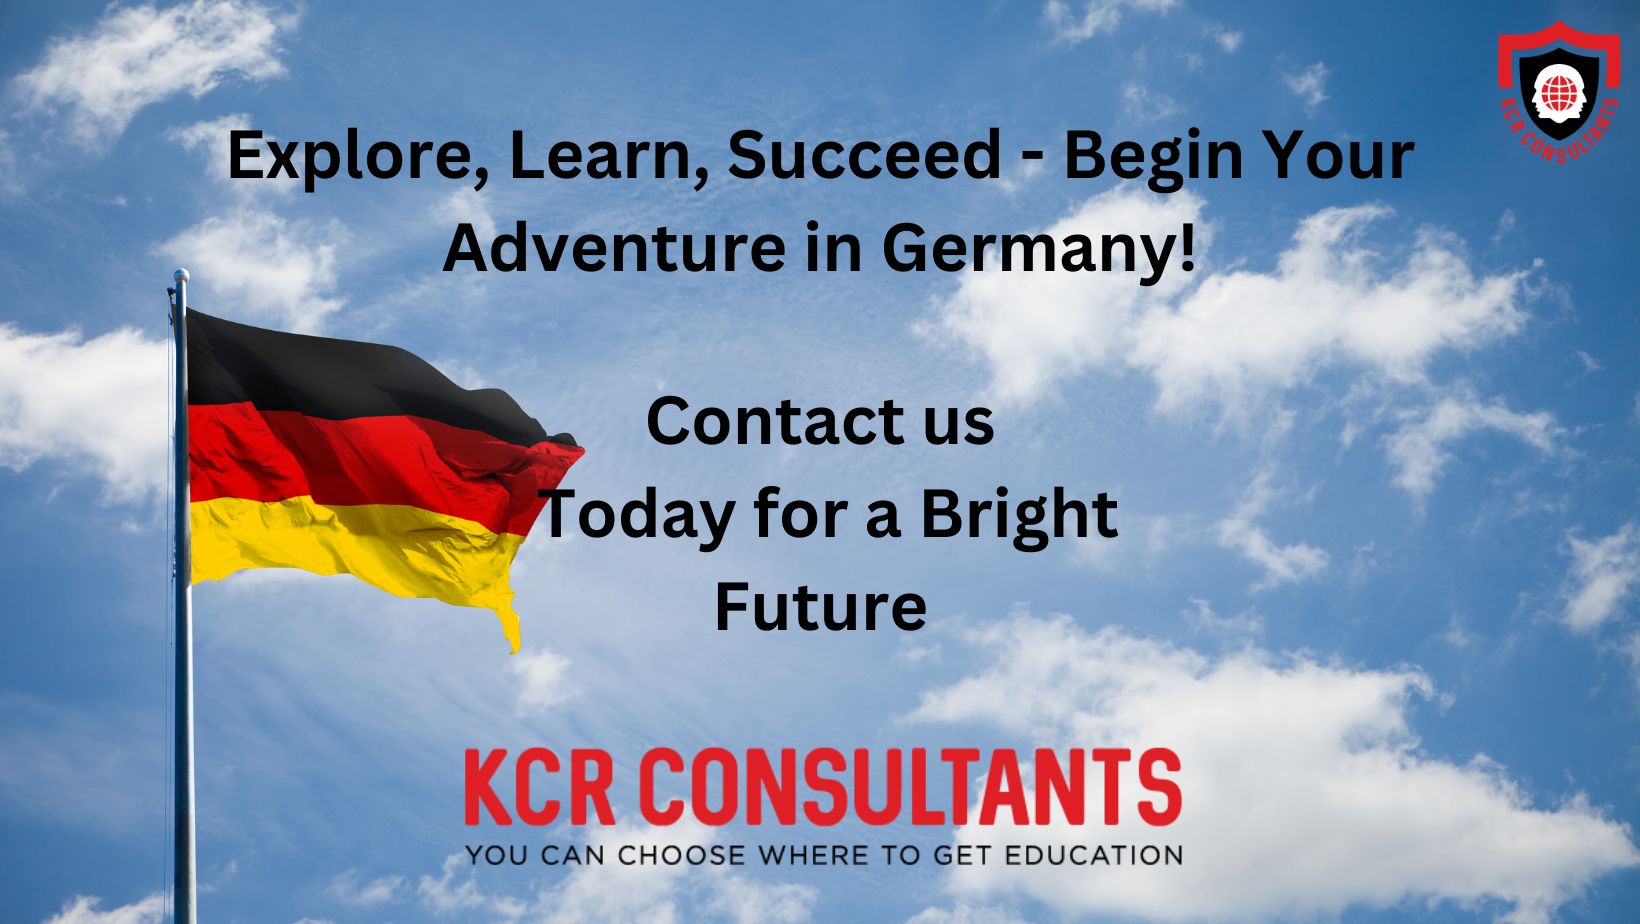 Studying in Germany - KCR CONSULTANTS - Contact us